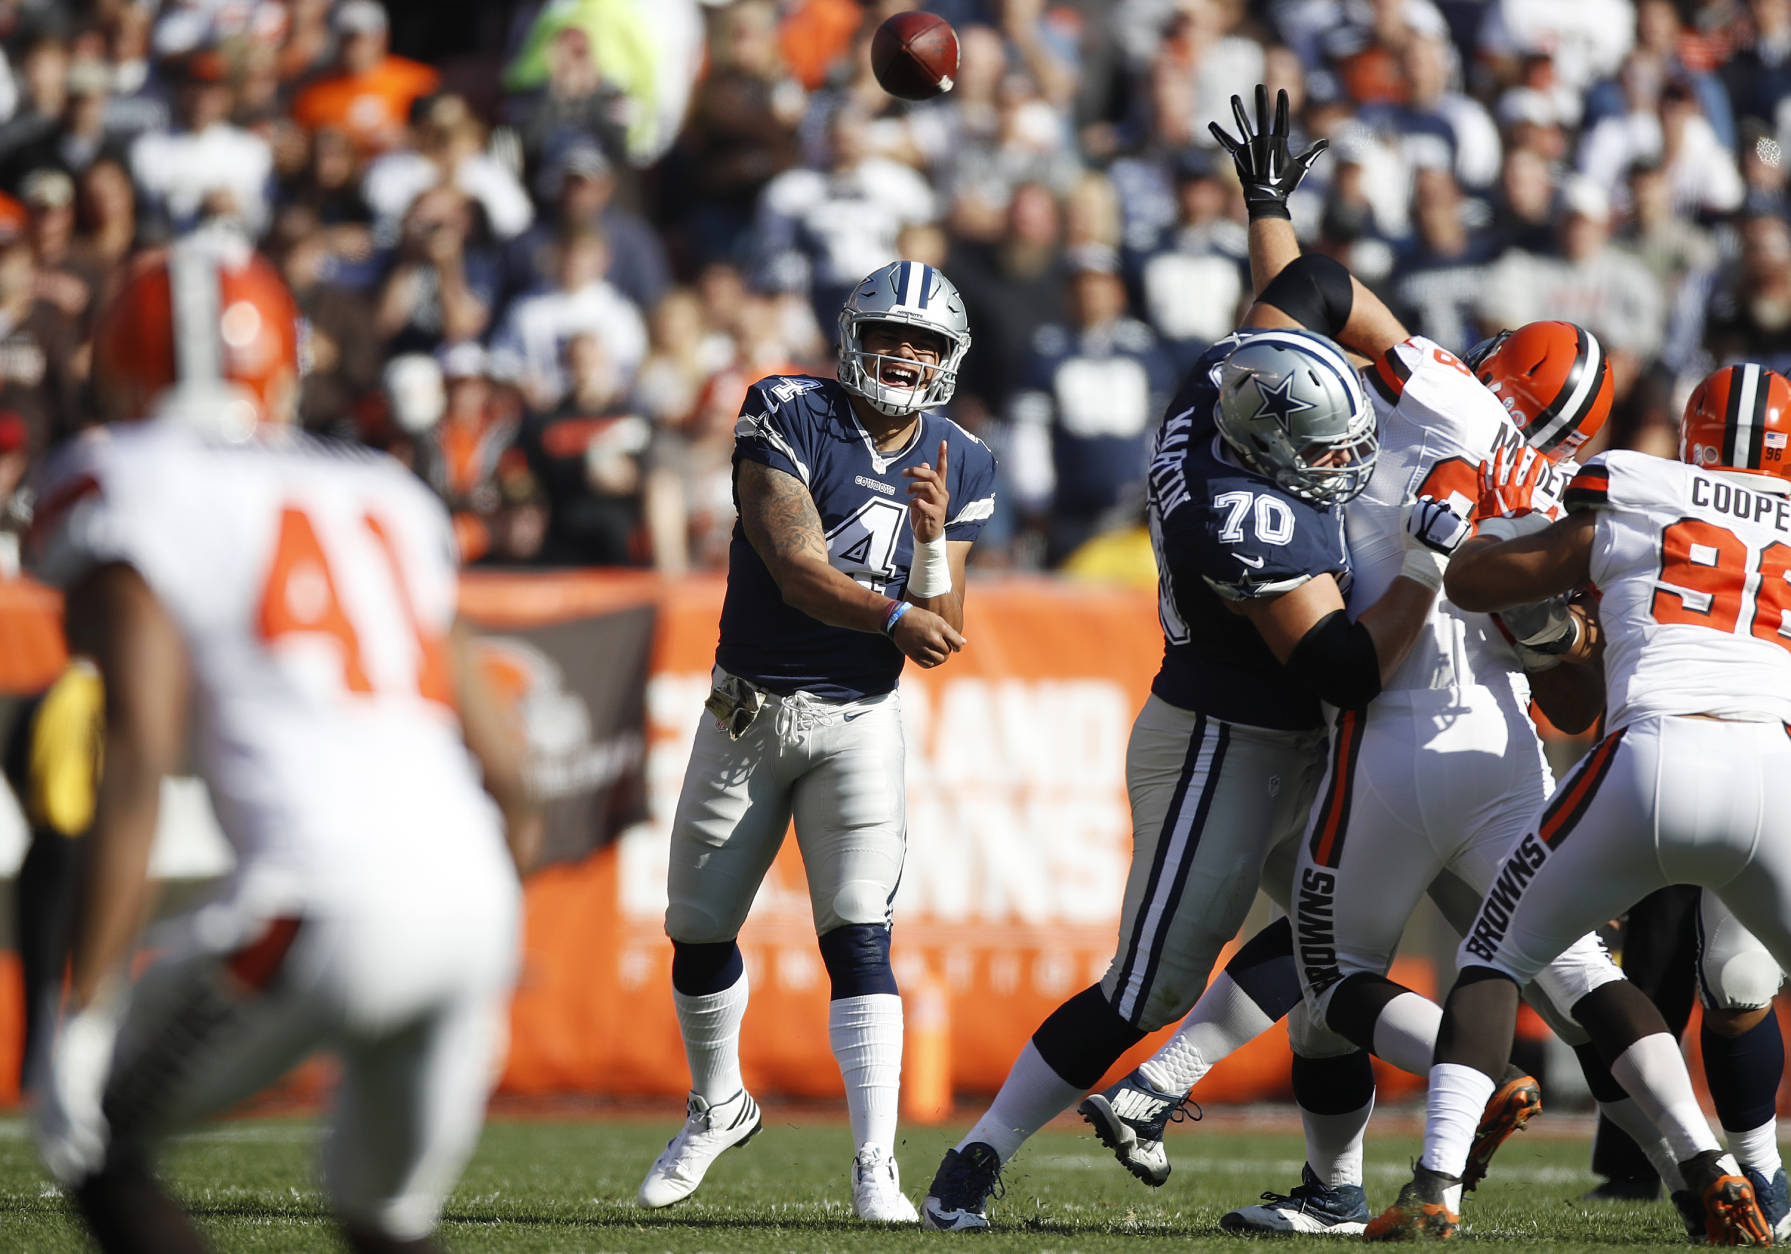 CLEVELAND, OH - NOVEMBER 06:  Dak Prescott #4 of the Dallas Cowboys looks to passes in the first half against the Cleveland Browns at FirstEnergy Stadium on November 6, 2016 in Cleveland, Ohio.  (Photo by Gregory Shamus/Getty Images)